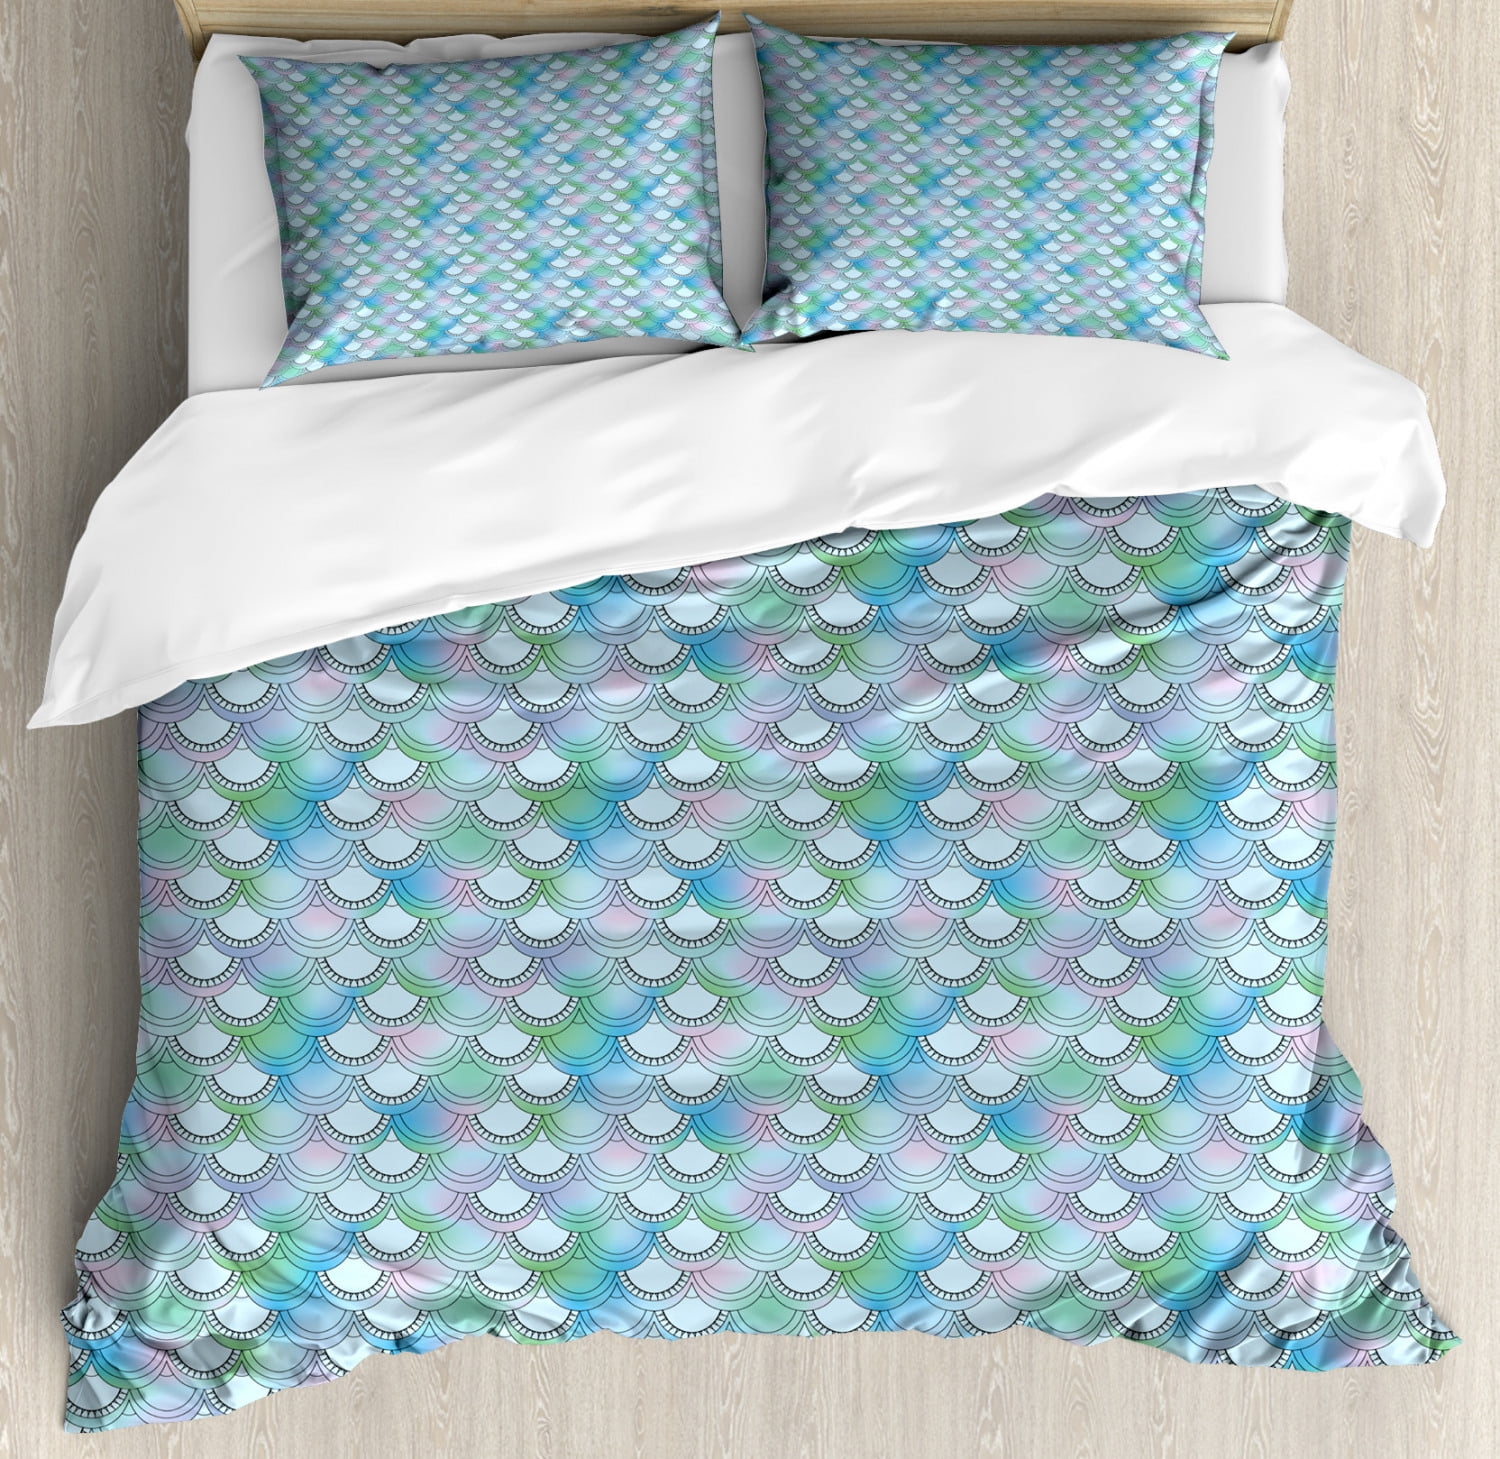 Fish Scale Queen Size Duvet Cover Set Japanese Squama Pattern With